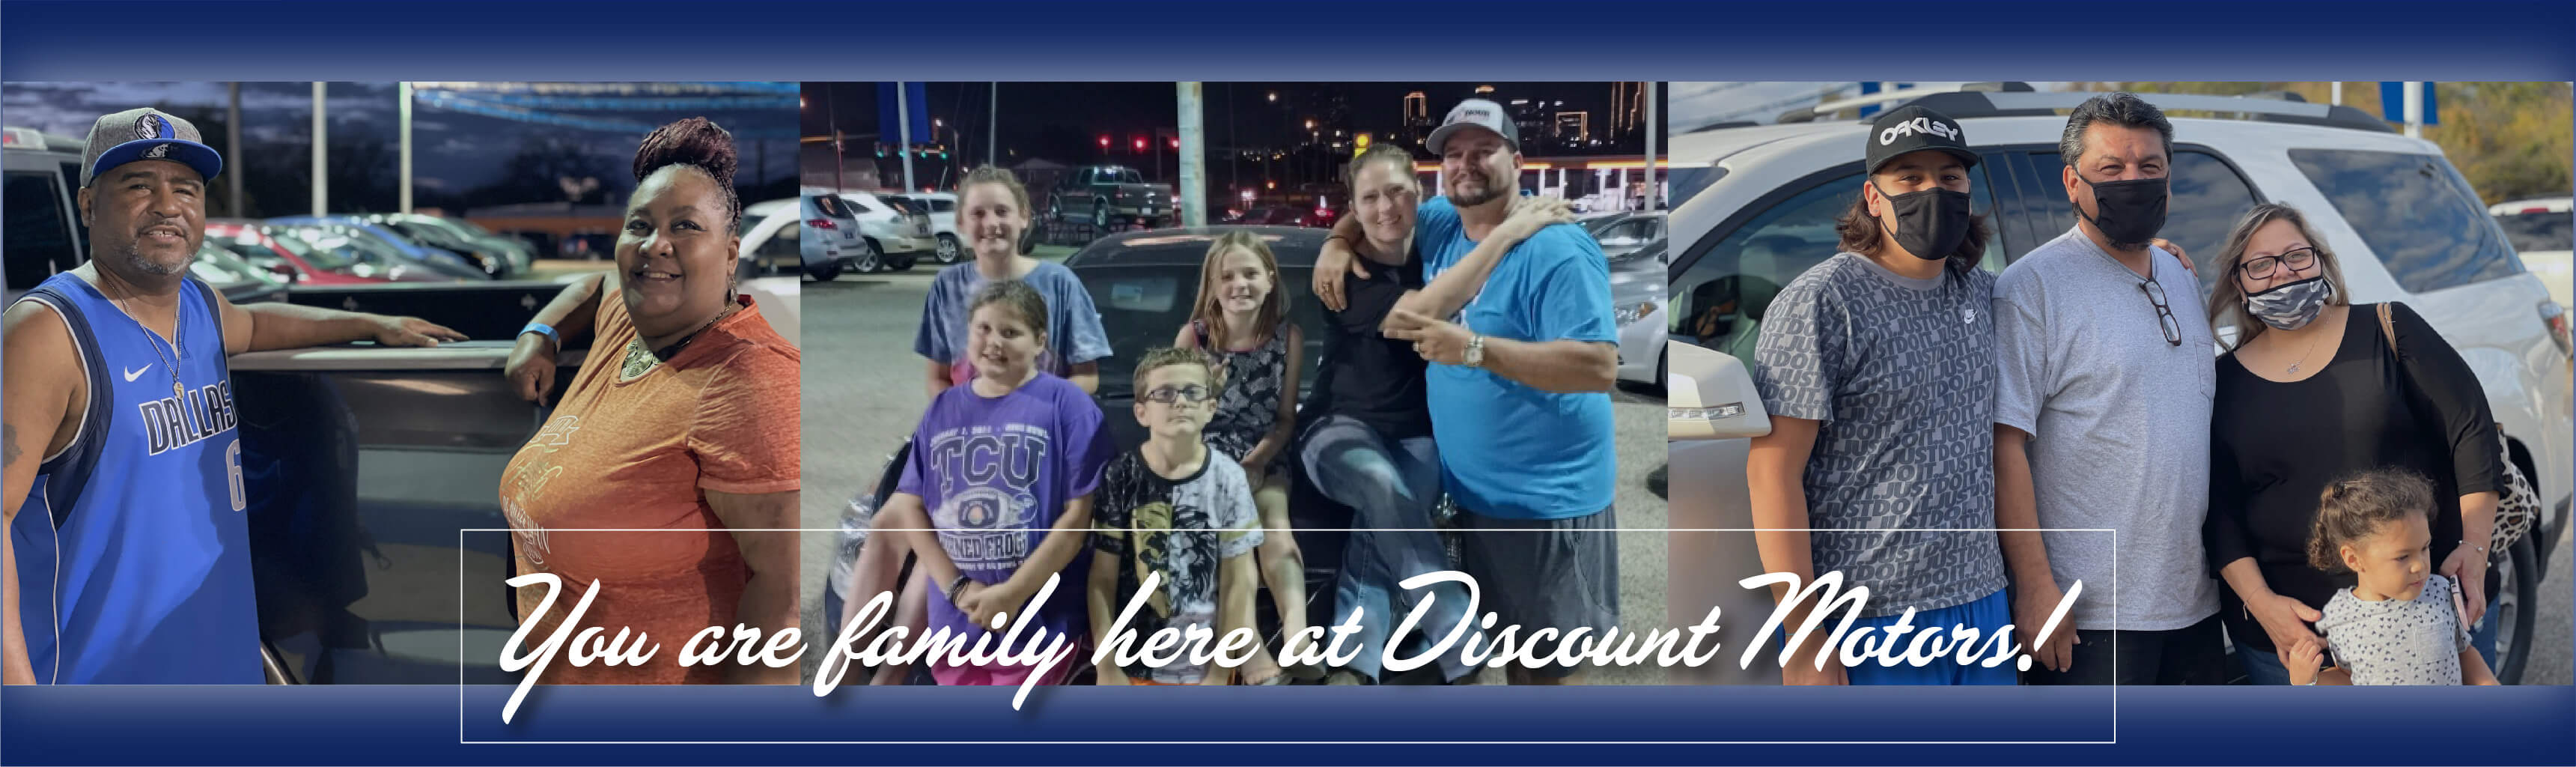 You are Family at Discount Motors Team Image